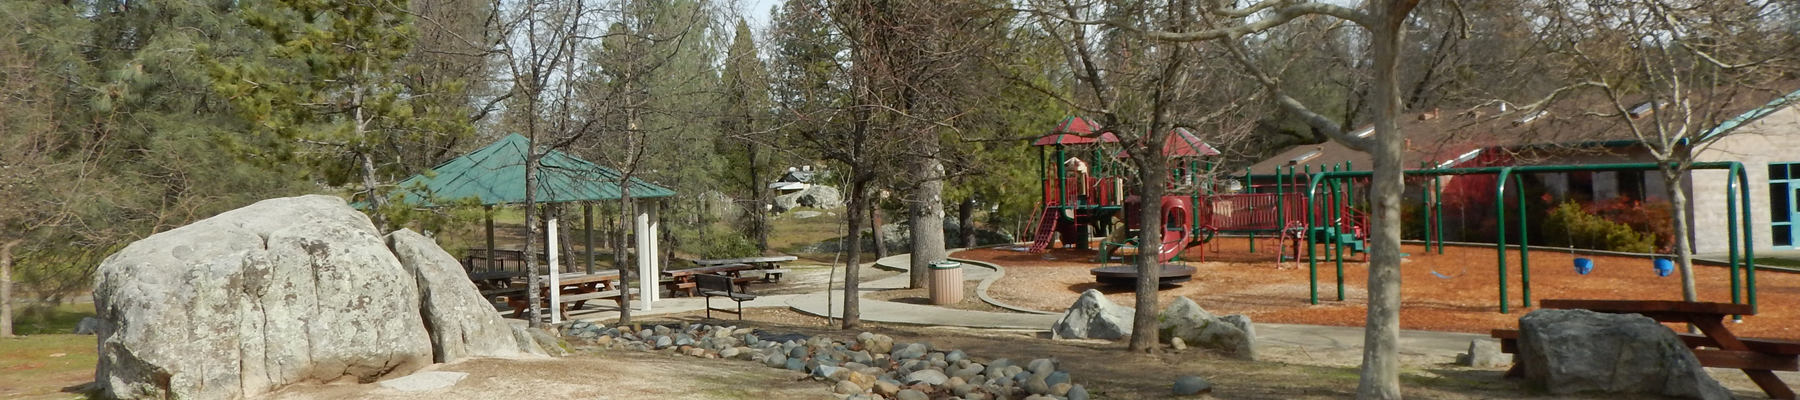 An image depicting the play structures, gazebo, and picnic benches at Pioneer Park